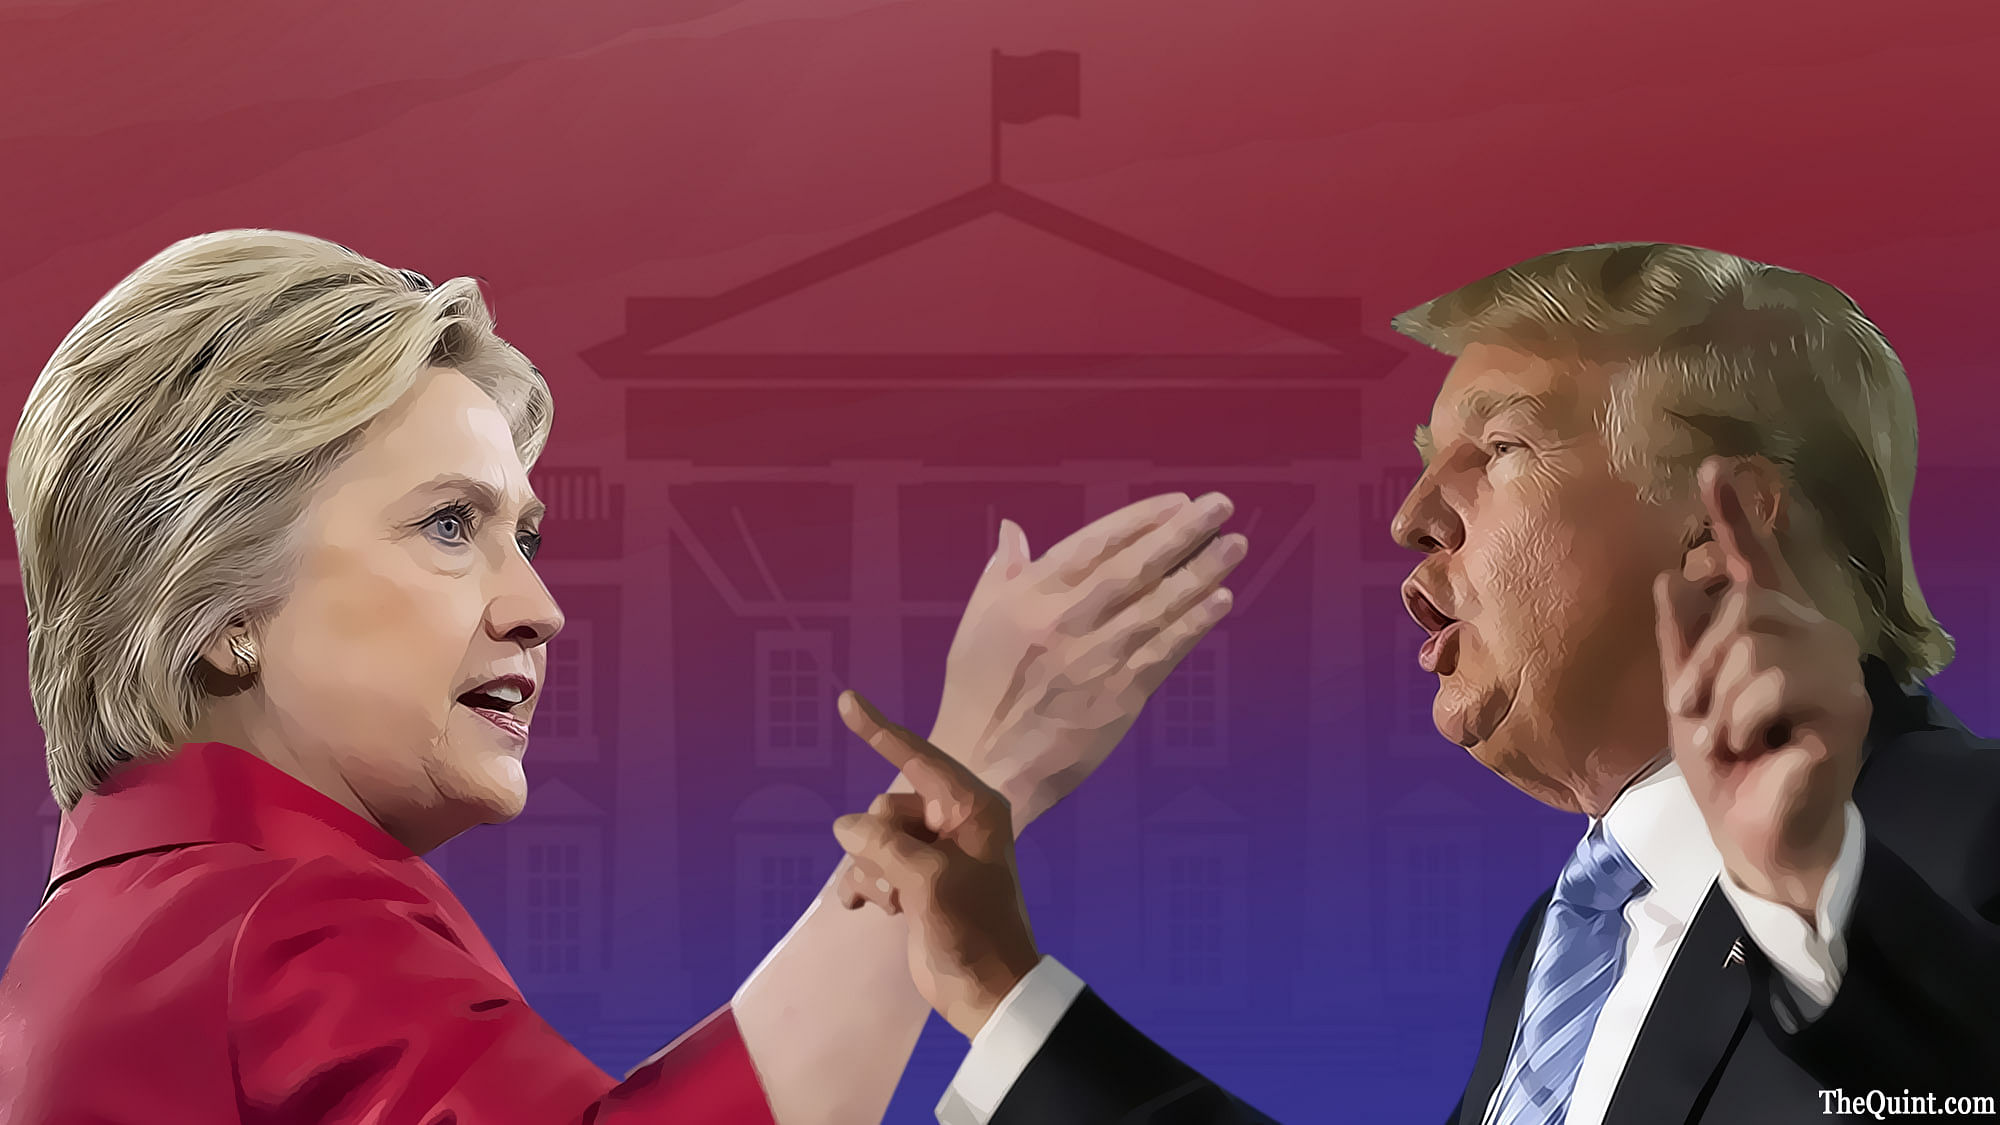 A neck-to-neck competition between Hillary Clinton and Donald Trump. (Photo Courtesy: <b>The Quint</b>)